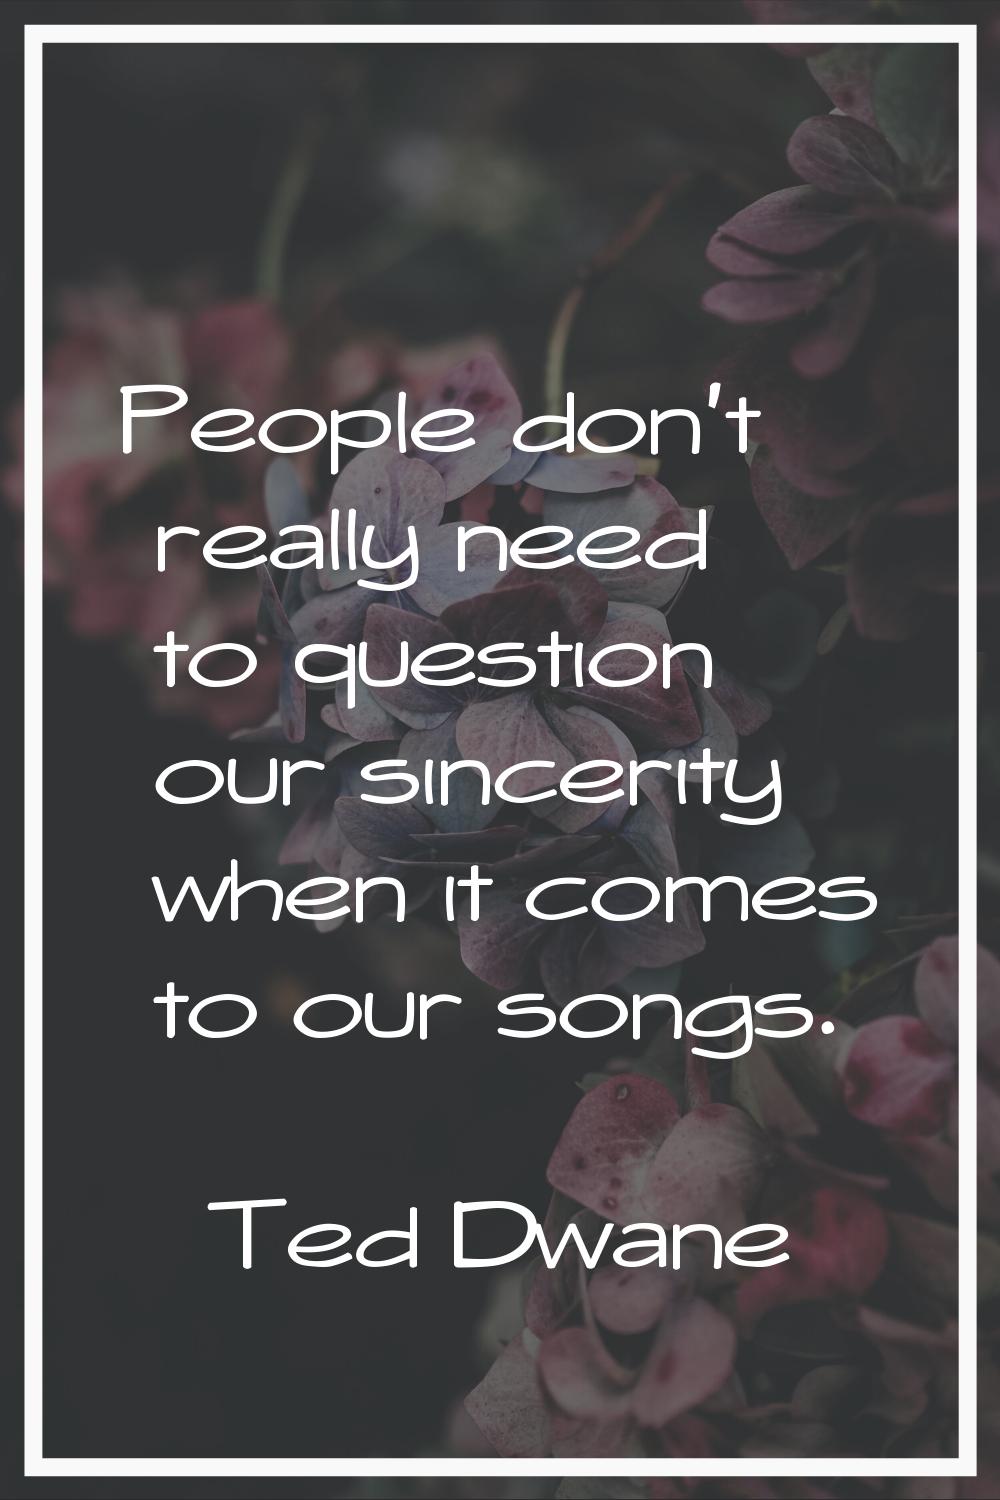 People don't really need to question our sincerity when it comes to our songs.